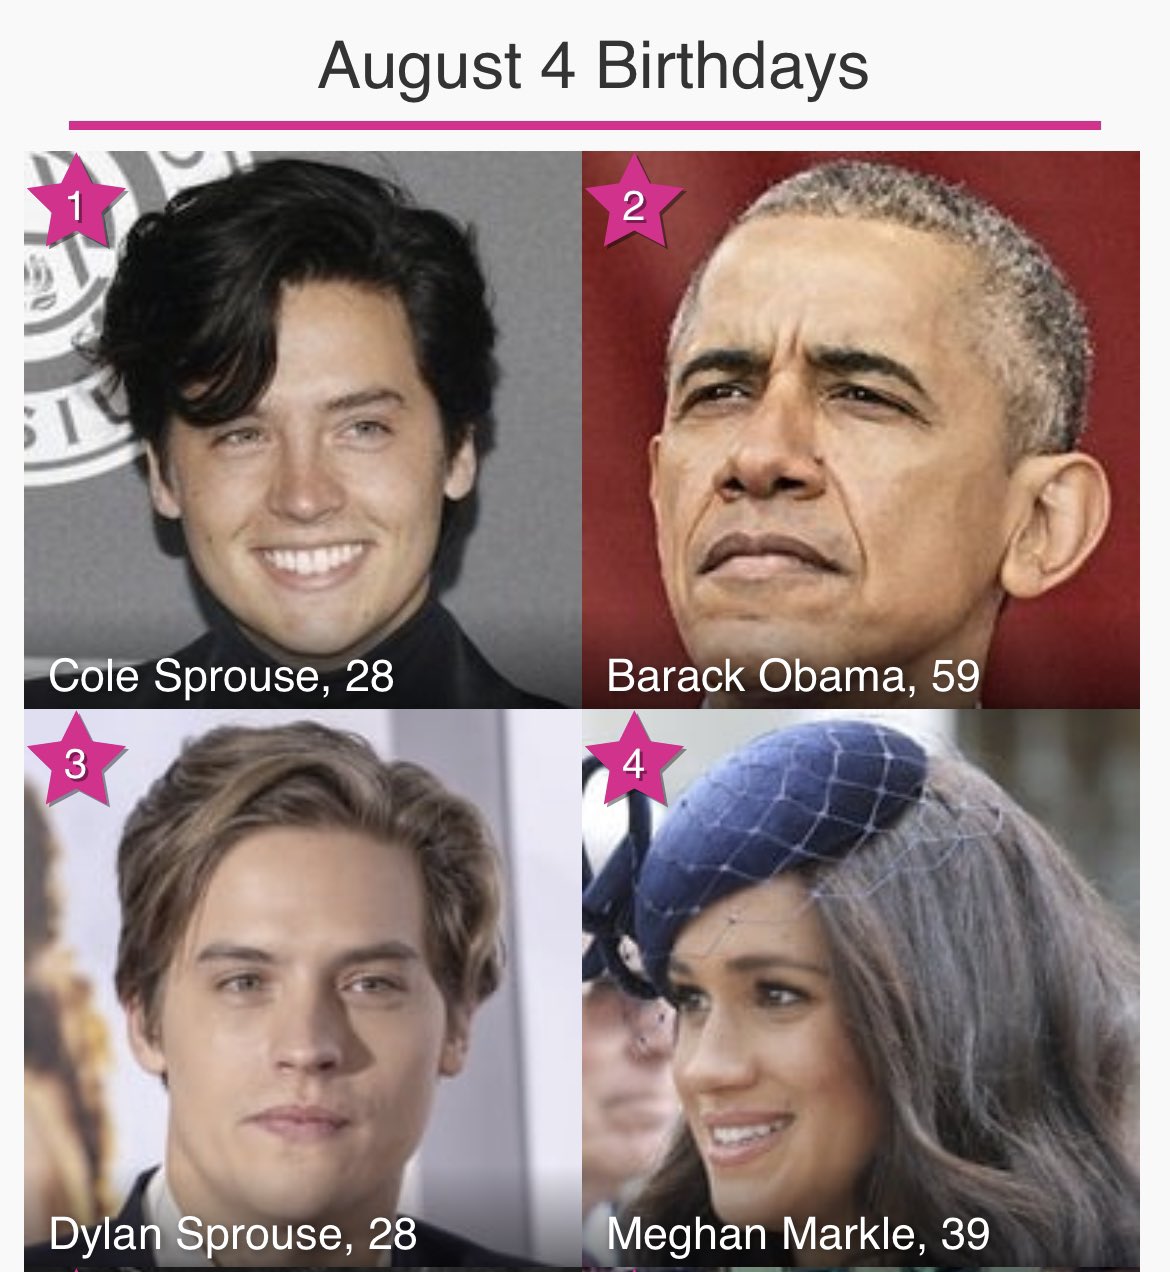 Happy birthday to Cole Sprouse, Barack Obama, Dylan Sprouse, and Meghan Markle in that order! 